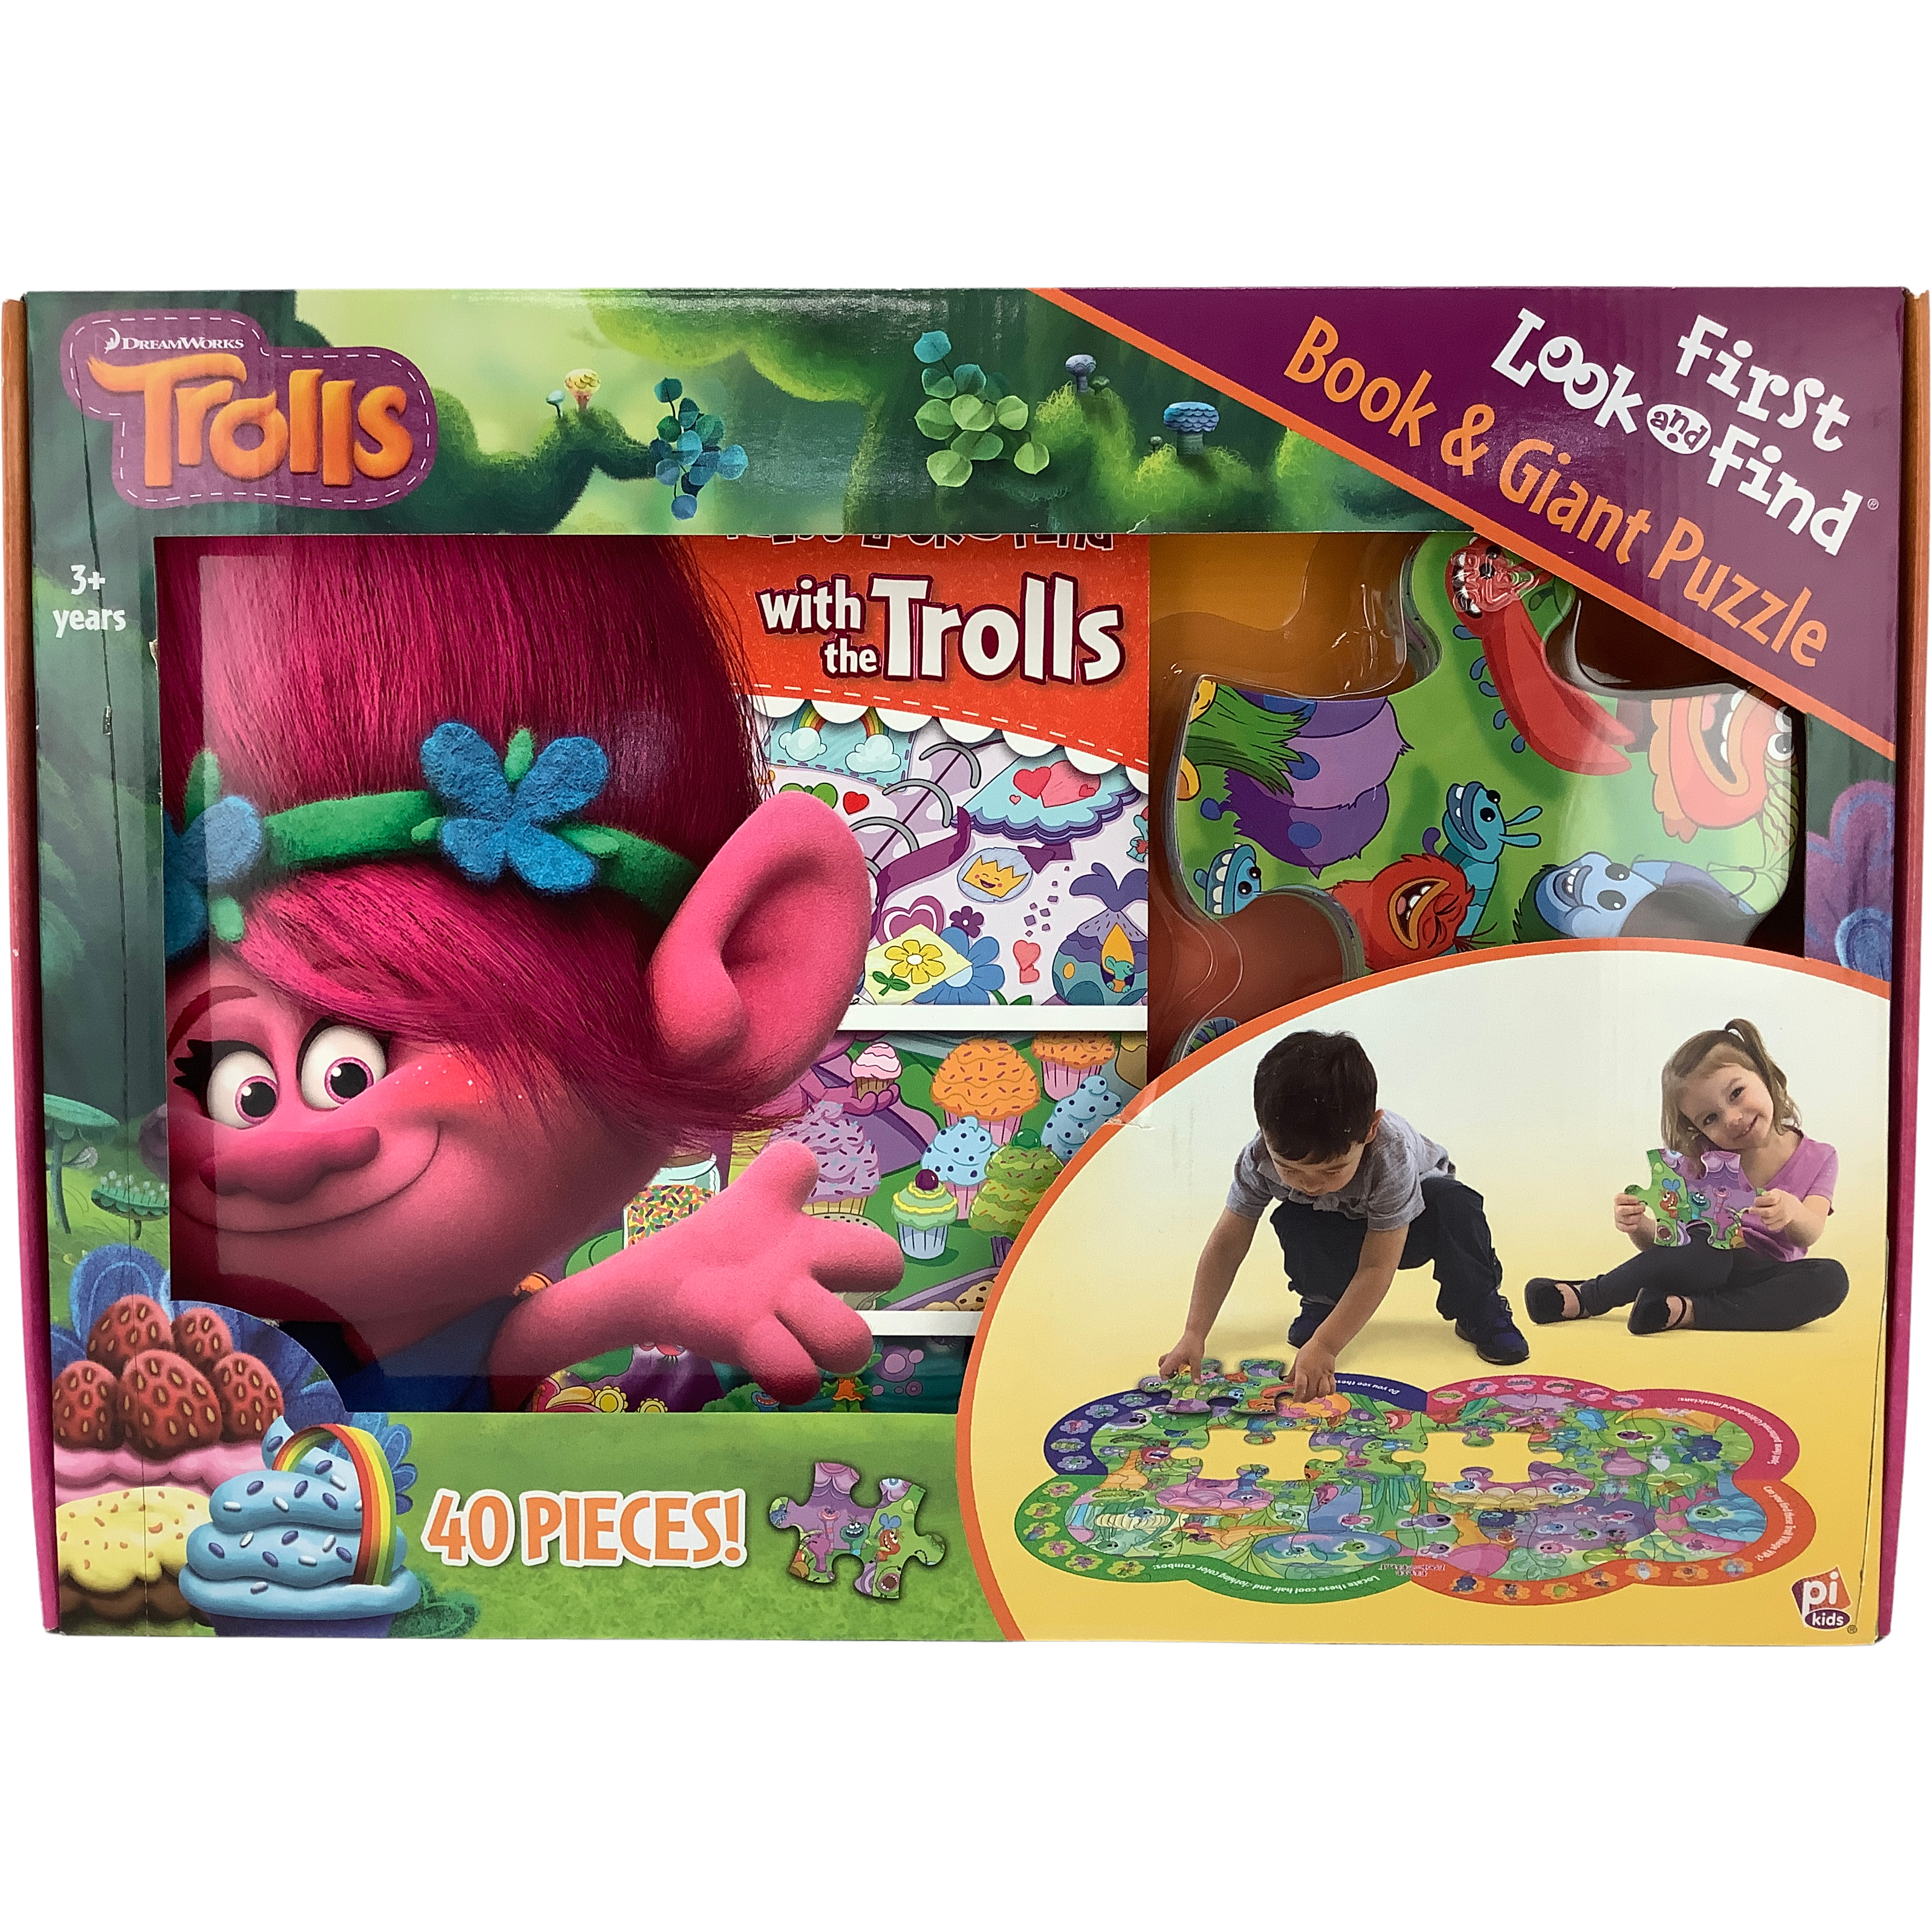 DreamWorks Trolls Book and Puzzle / First Look and Find / Giant Floor Puzzle **DEALS**